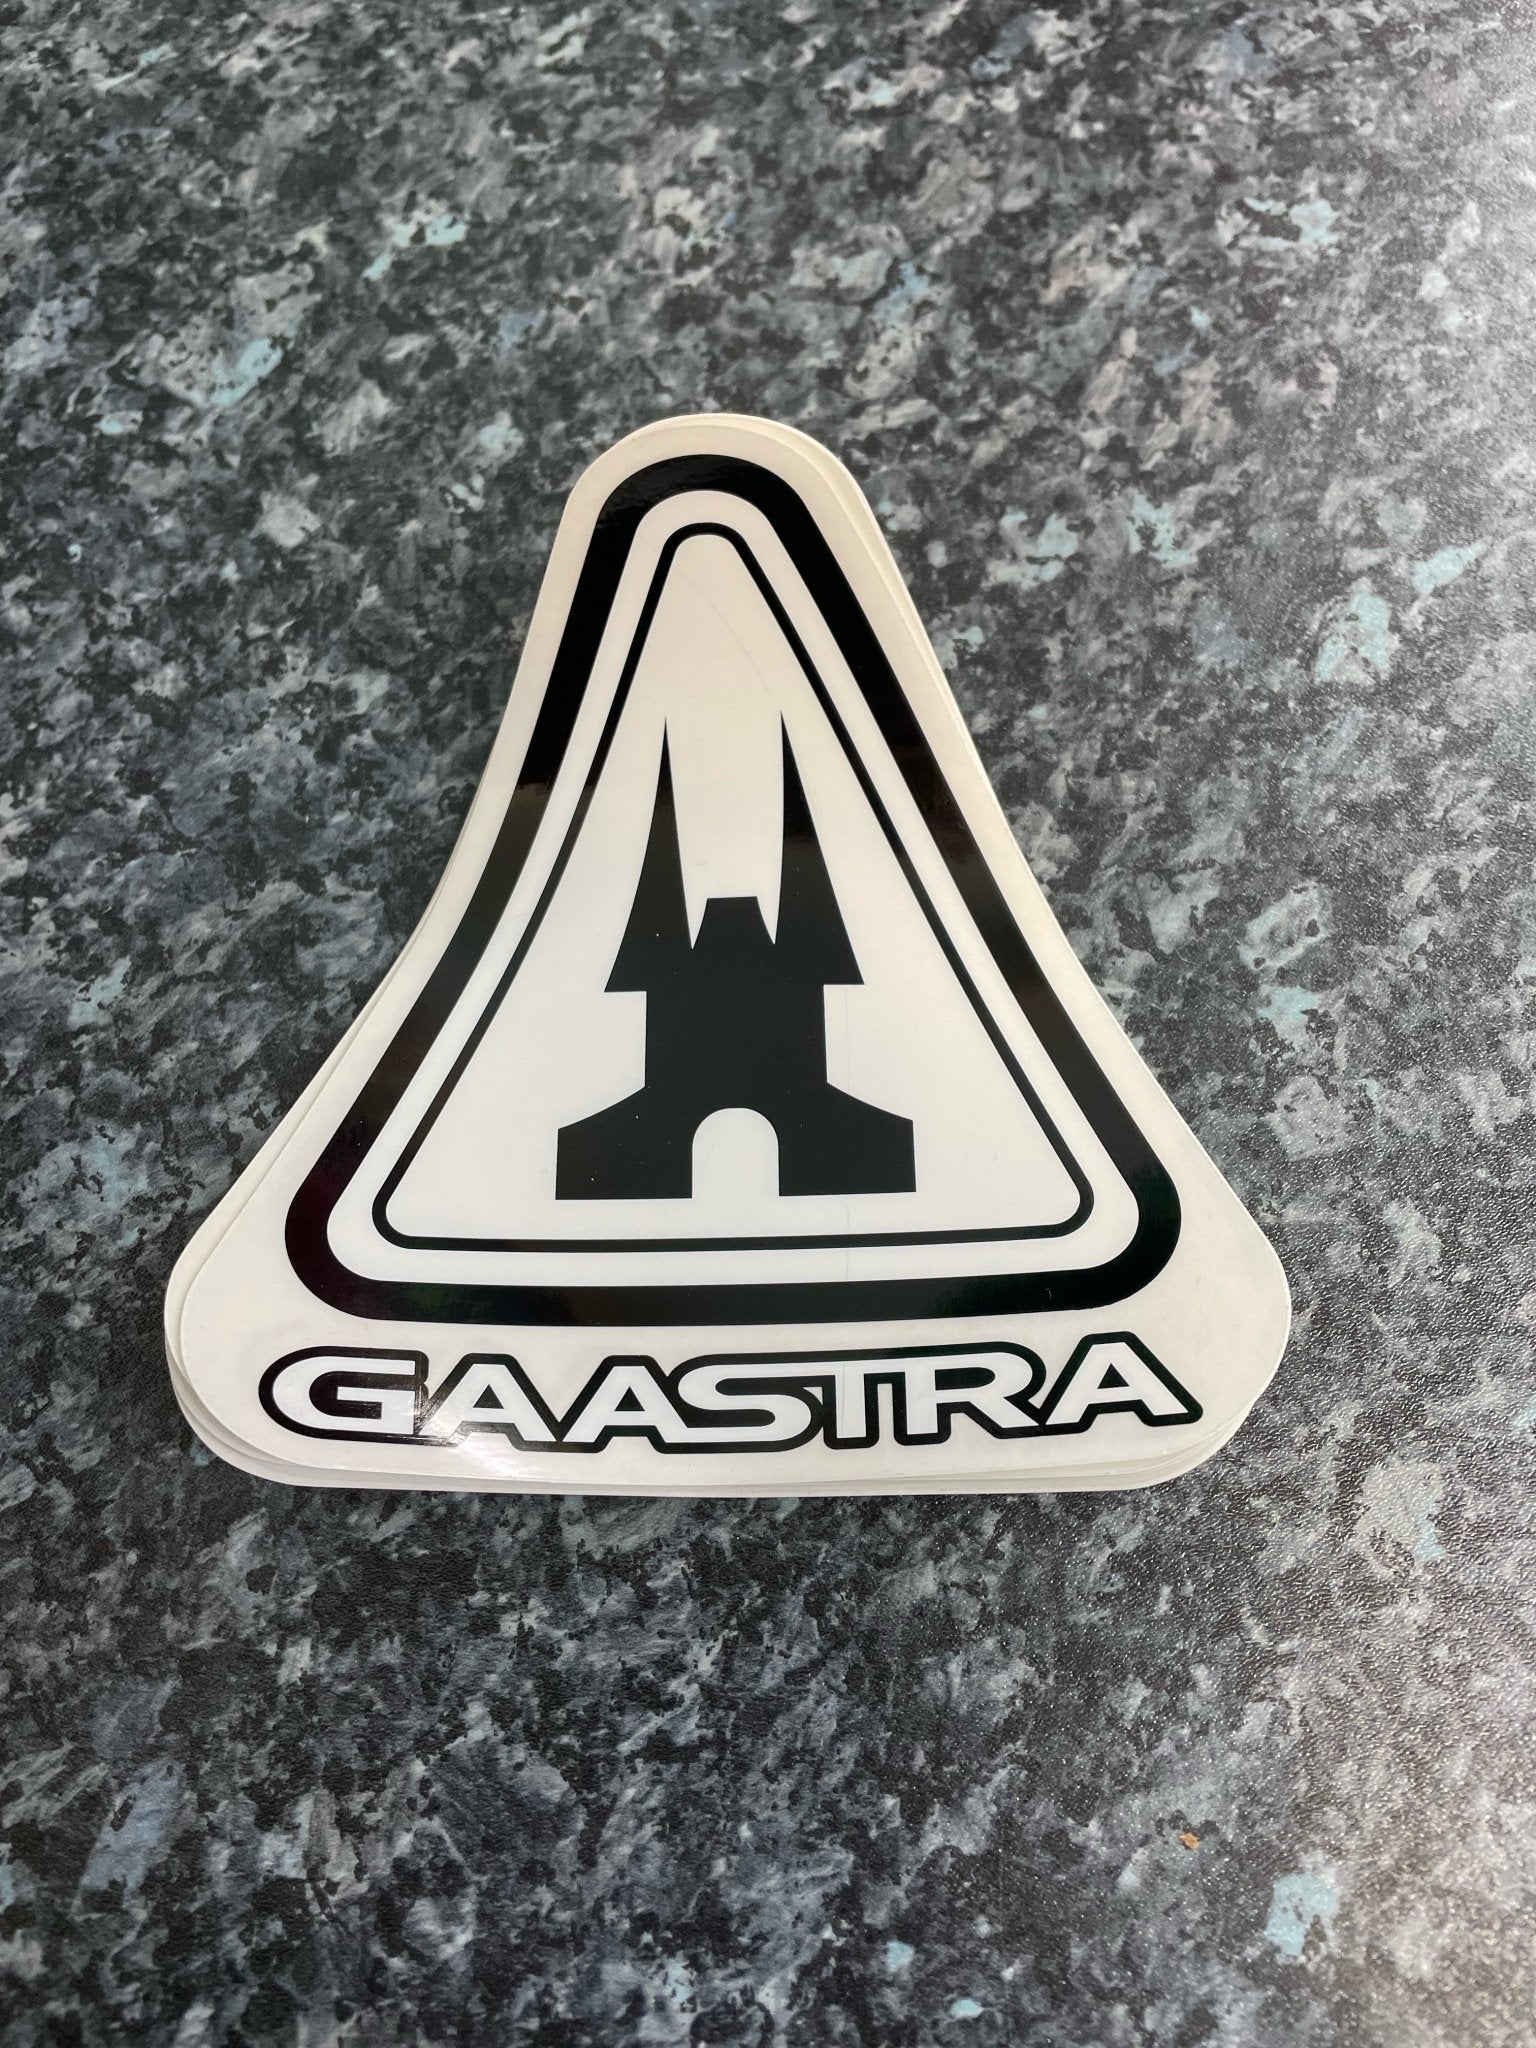 Gaastra Stickers - Worthing Watersports - Decorative Stickers - Gaastra